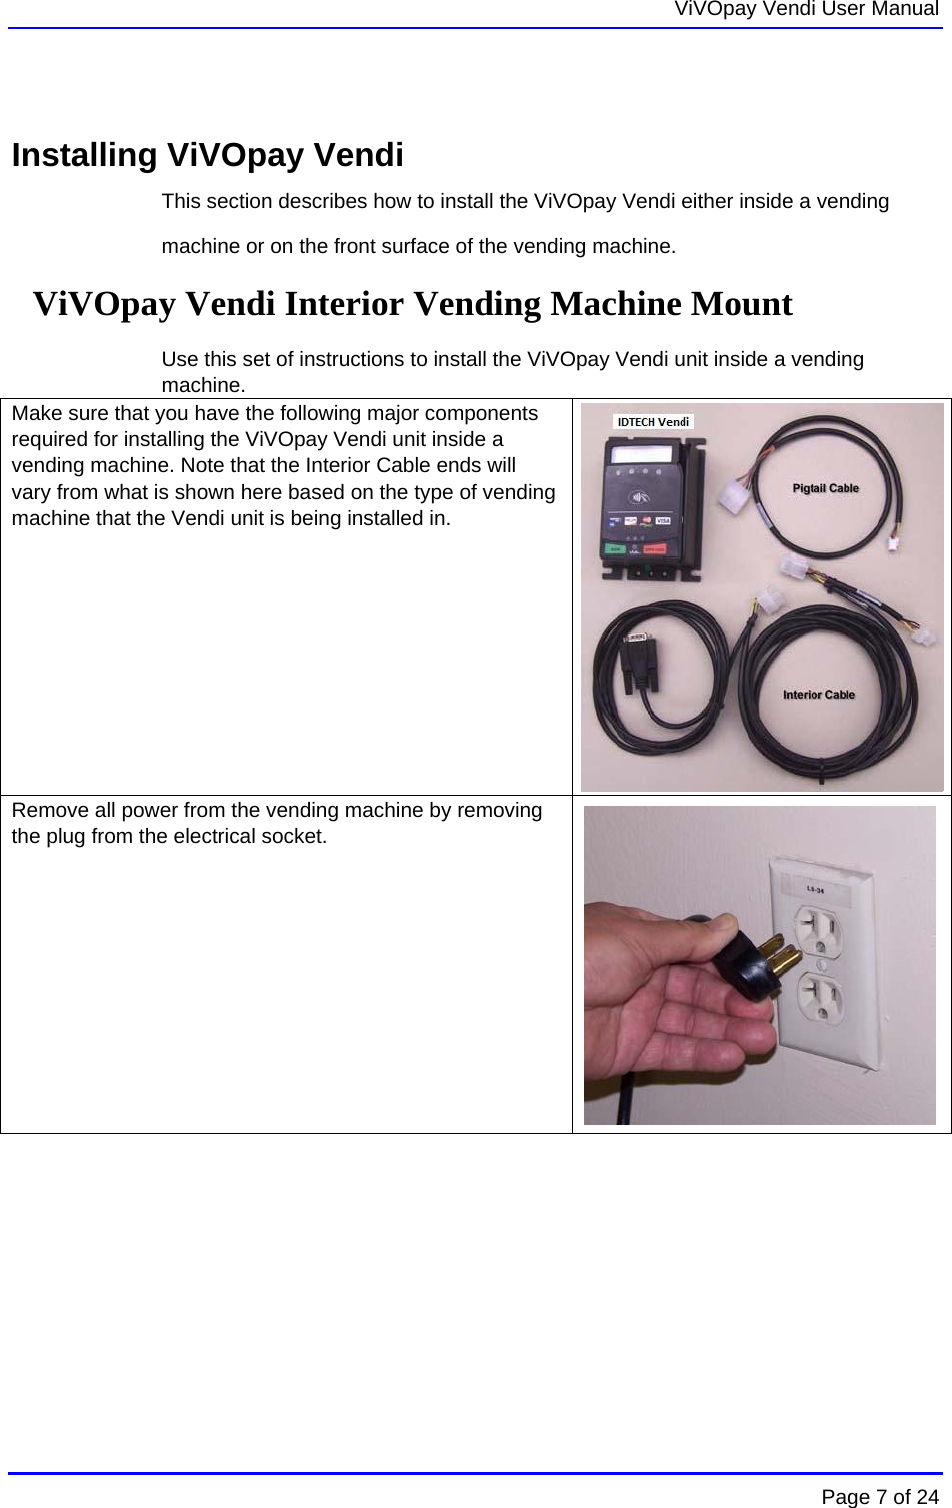   ViVOpay Vendi User Manual        Page 7 of 24     Installing ViVOpay Vendi This section describes how to install the ViVOpay Vendi either inside a vending machine or on the front surface of the vending machine.  ViVOpay Vendi Interior Vending Machine Mount  Use this set of instructions to install the ViVOpay Vendi unit inside a vending machine. Make sure that you have the following major components required for installing the ViVOpay Vendi unit inside a vending machine. Note that the Interior Cable ends will vary from what is shown here based on the type of vending machine that the Vendi unit is being installed in.                  Remove all power from the vending machine by removing the plug from the electrical socket.   